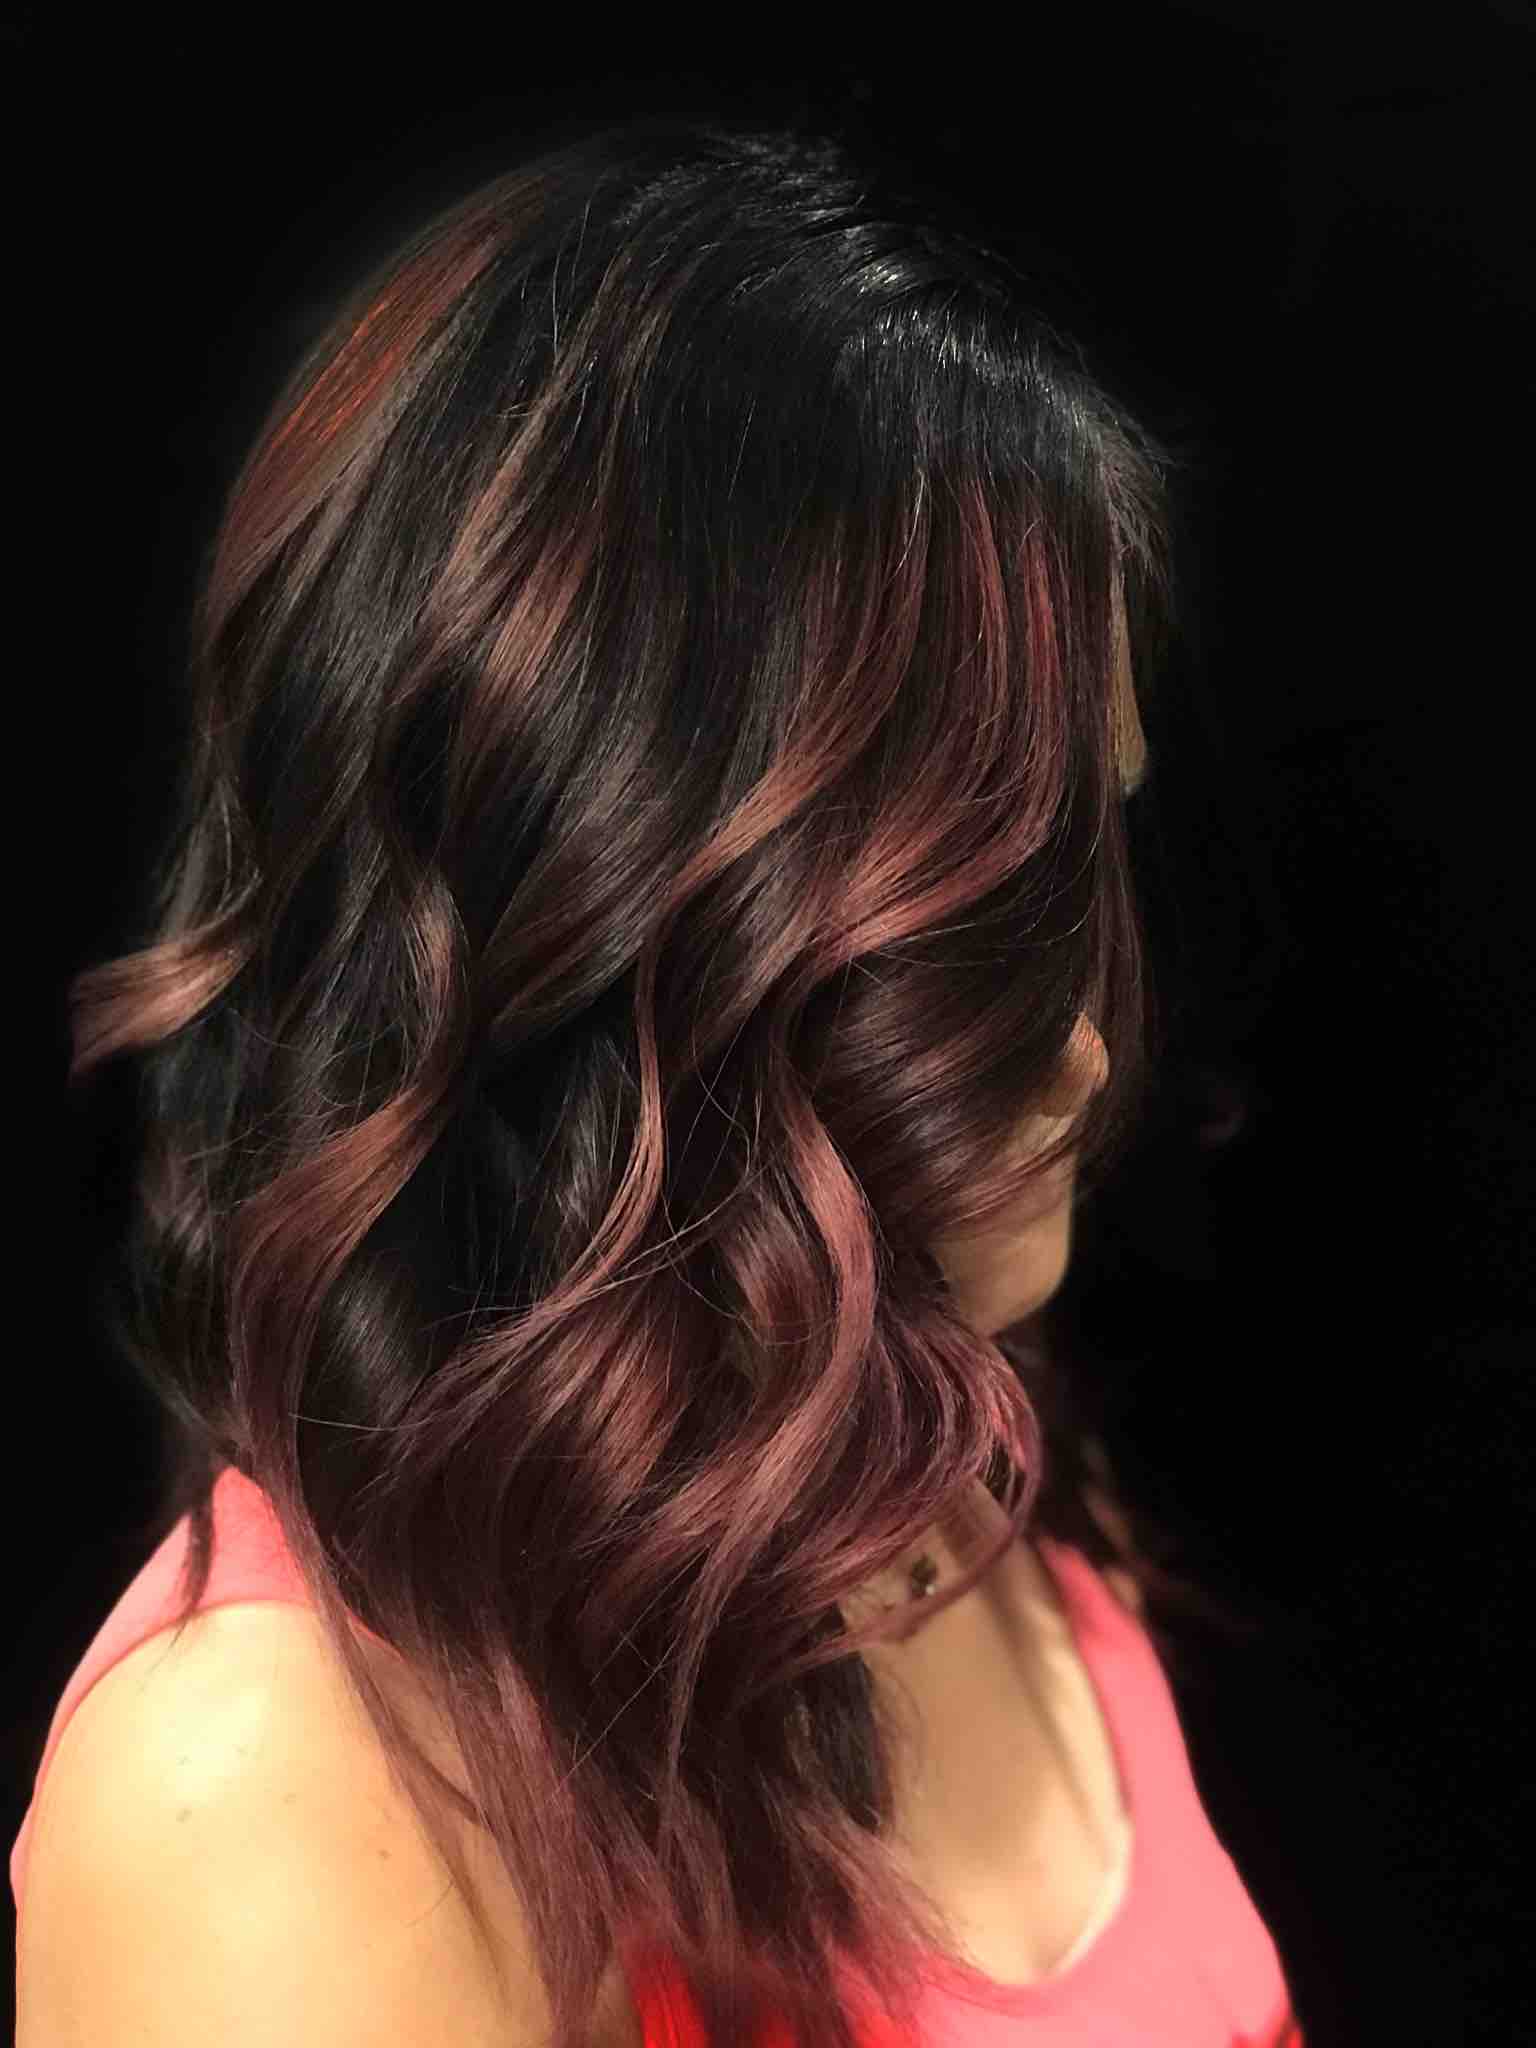 Candy Shine Treatment And Blowdry